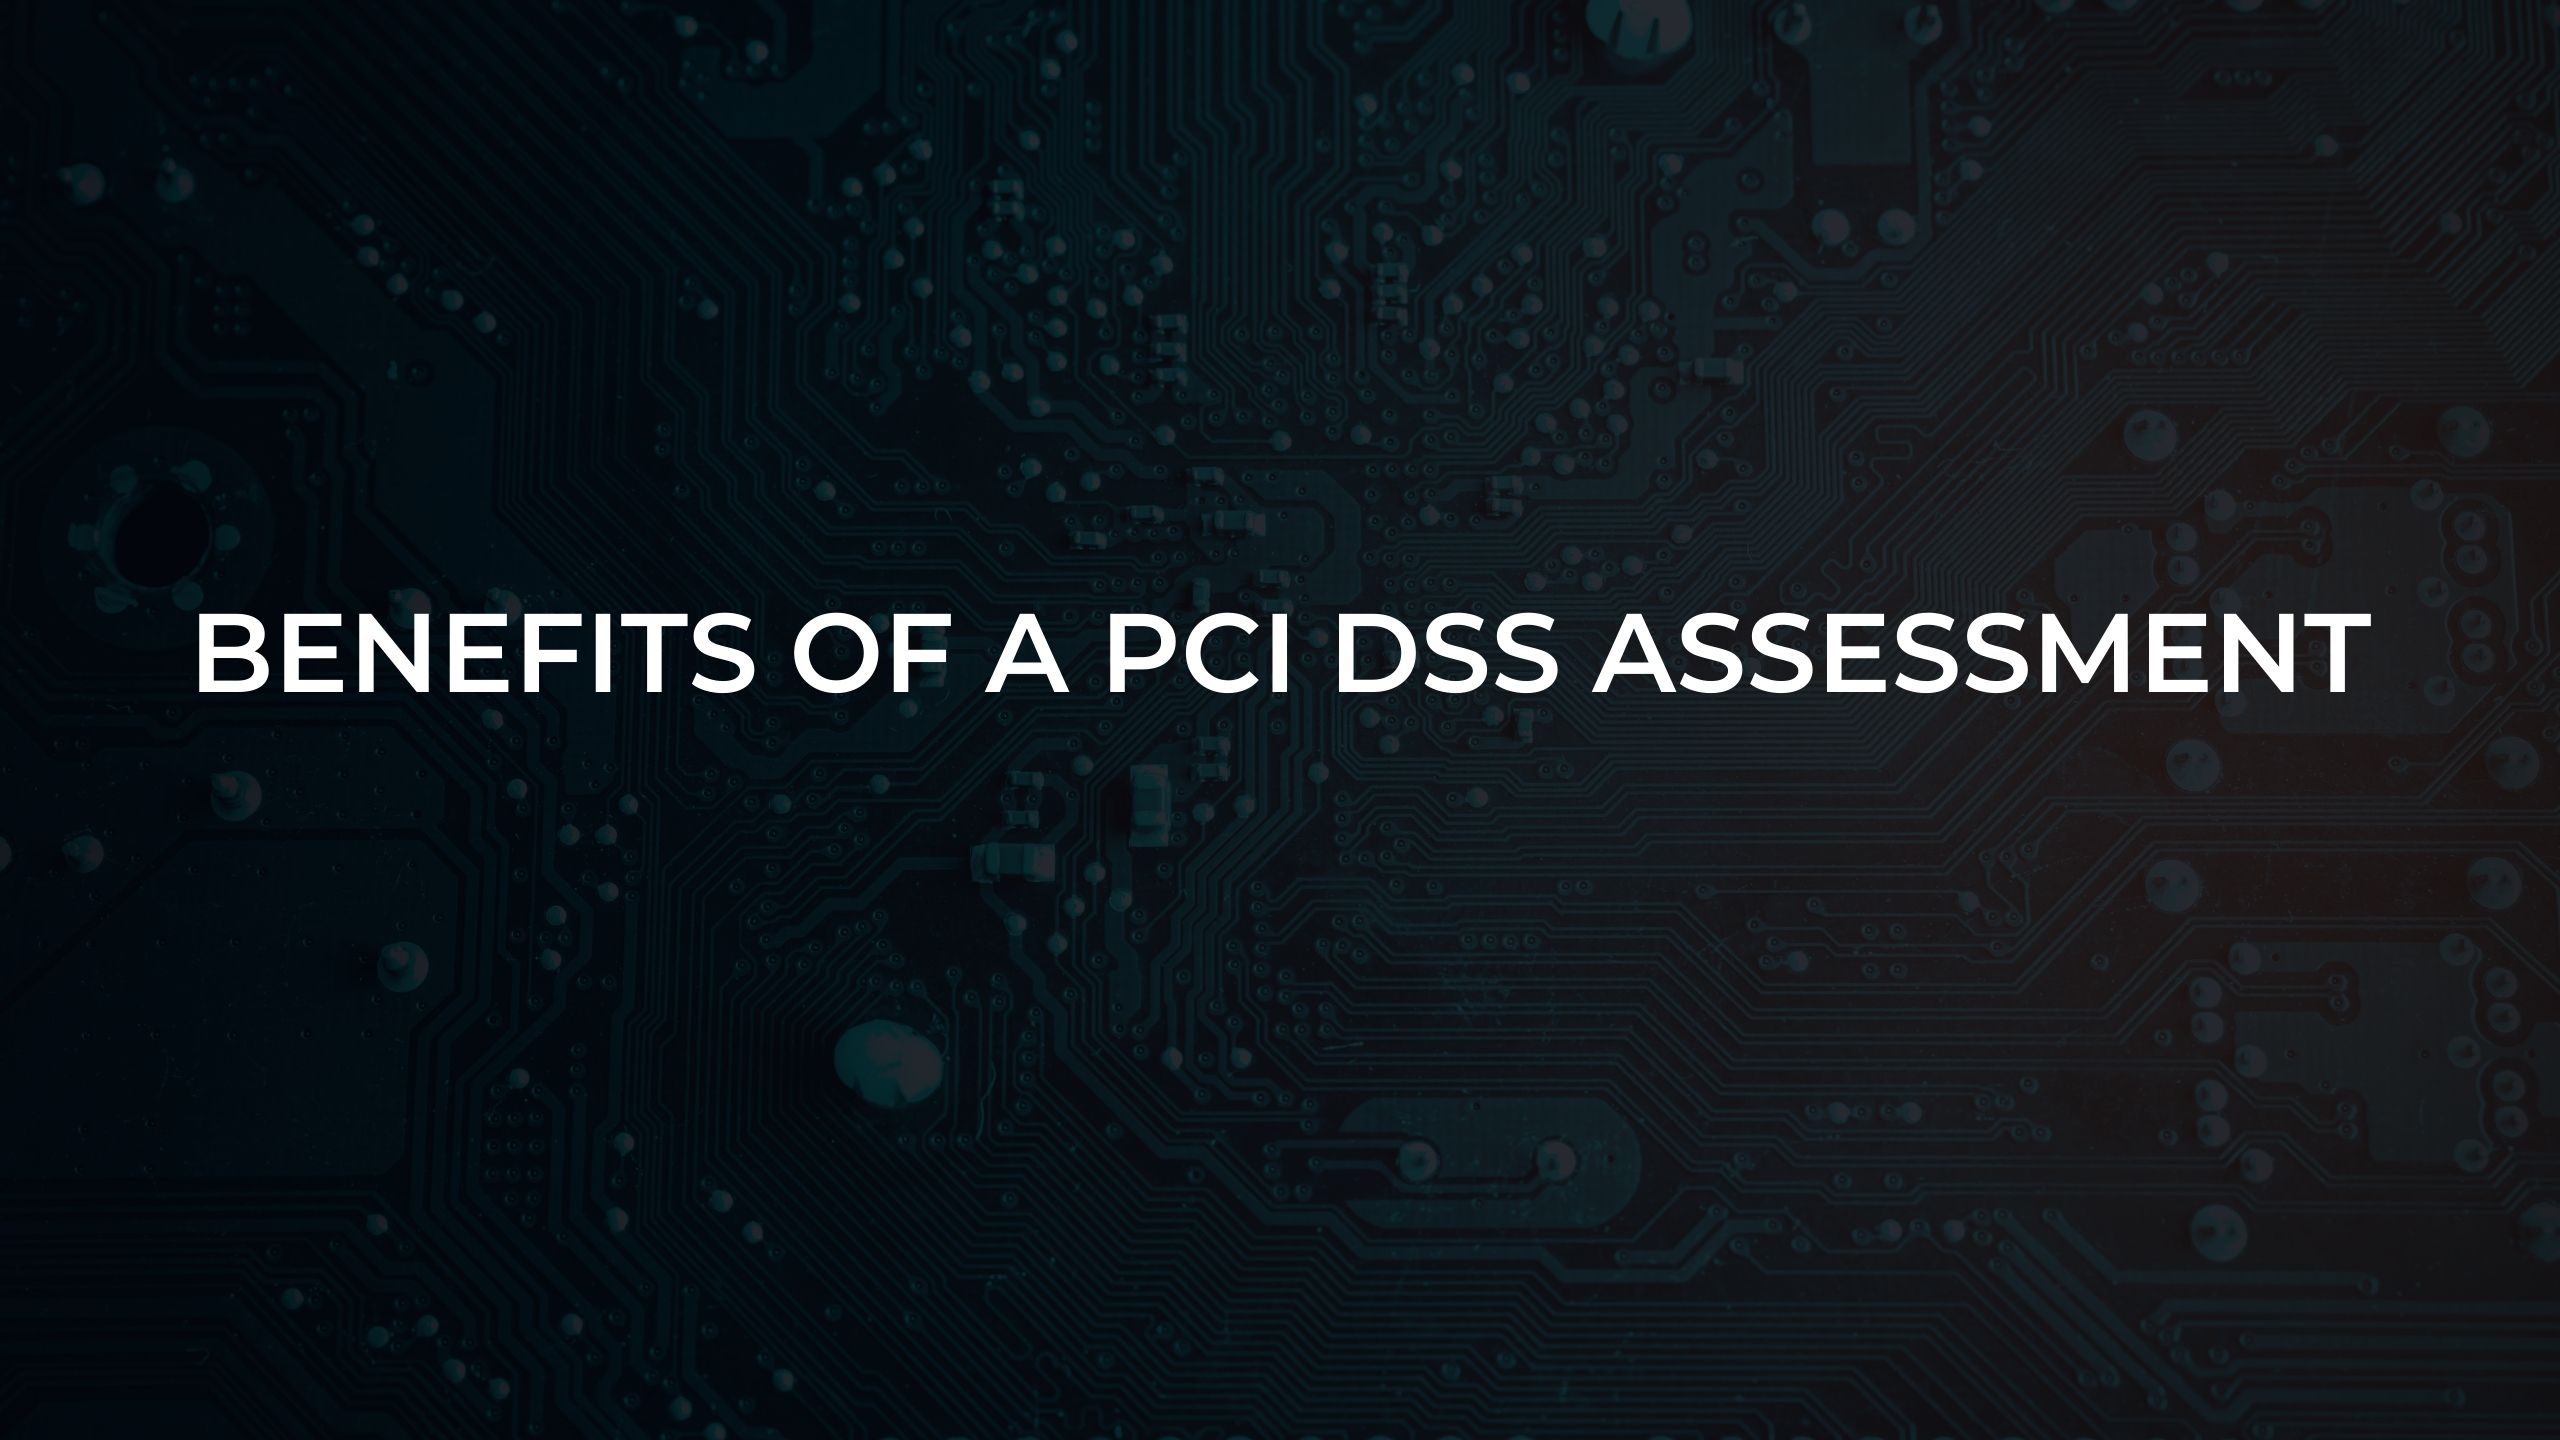 Benefits of a PCI DSS Assessment